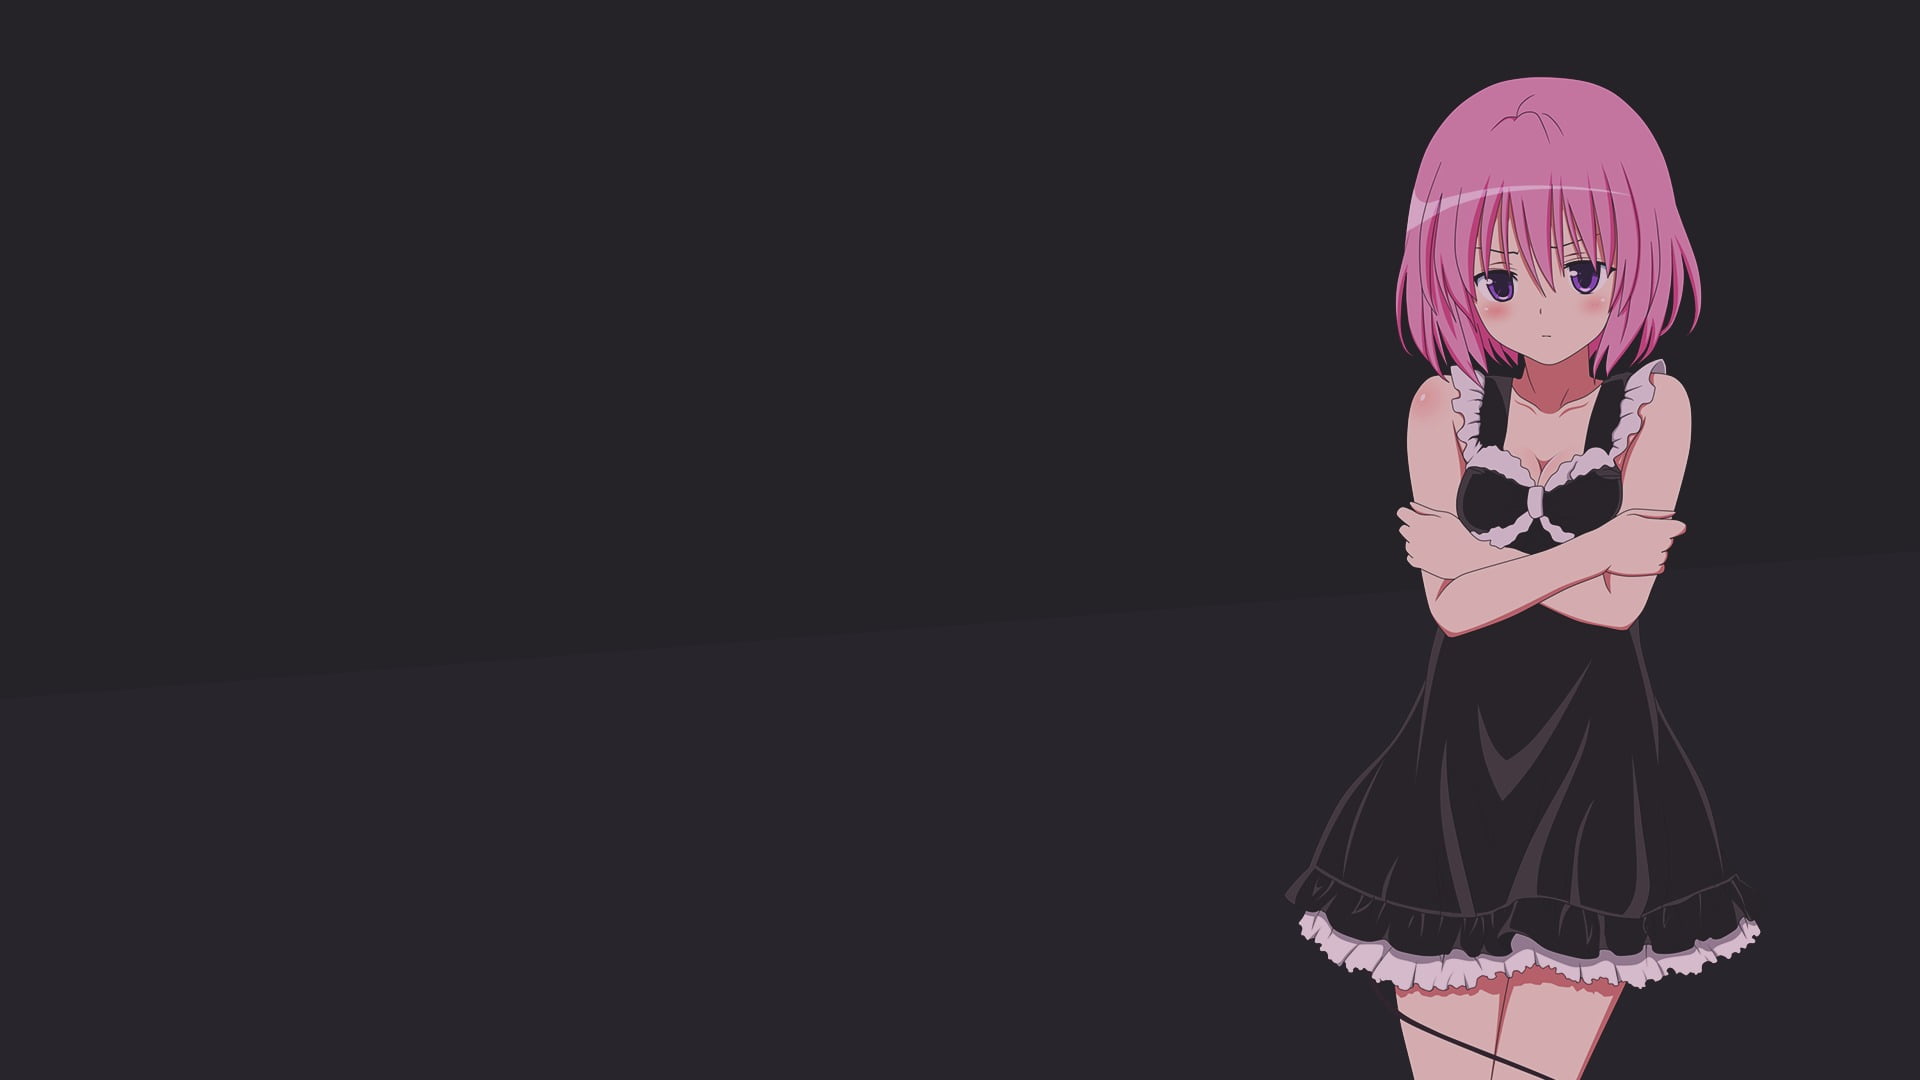 pink-haired female anime character wallpaper, anime girls, minimalism